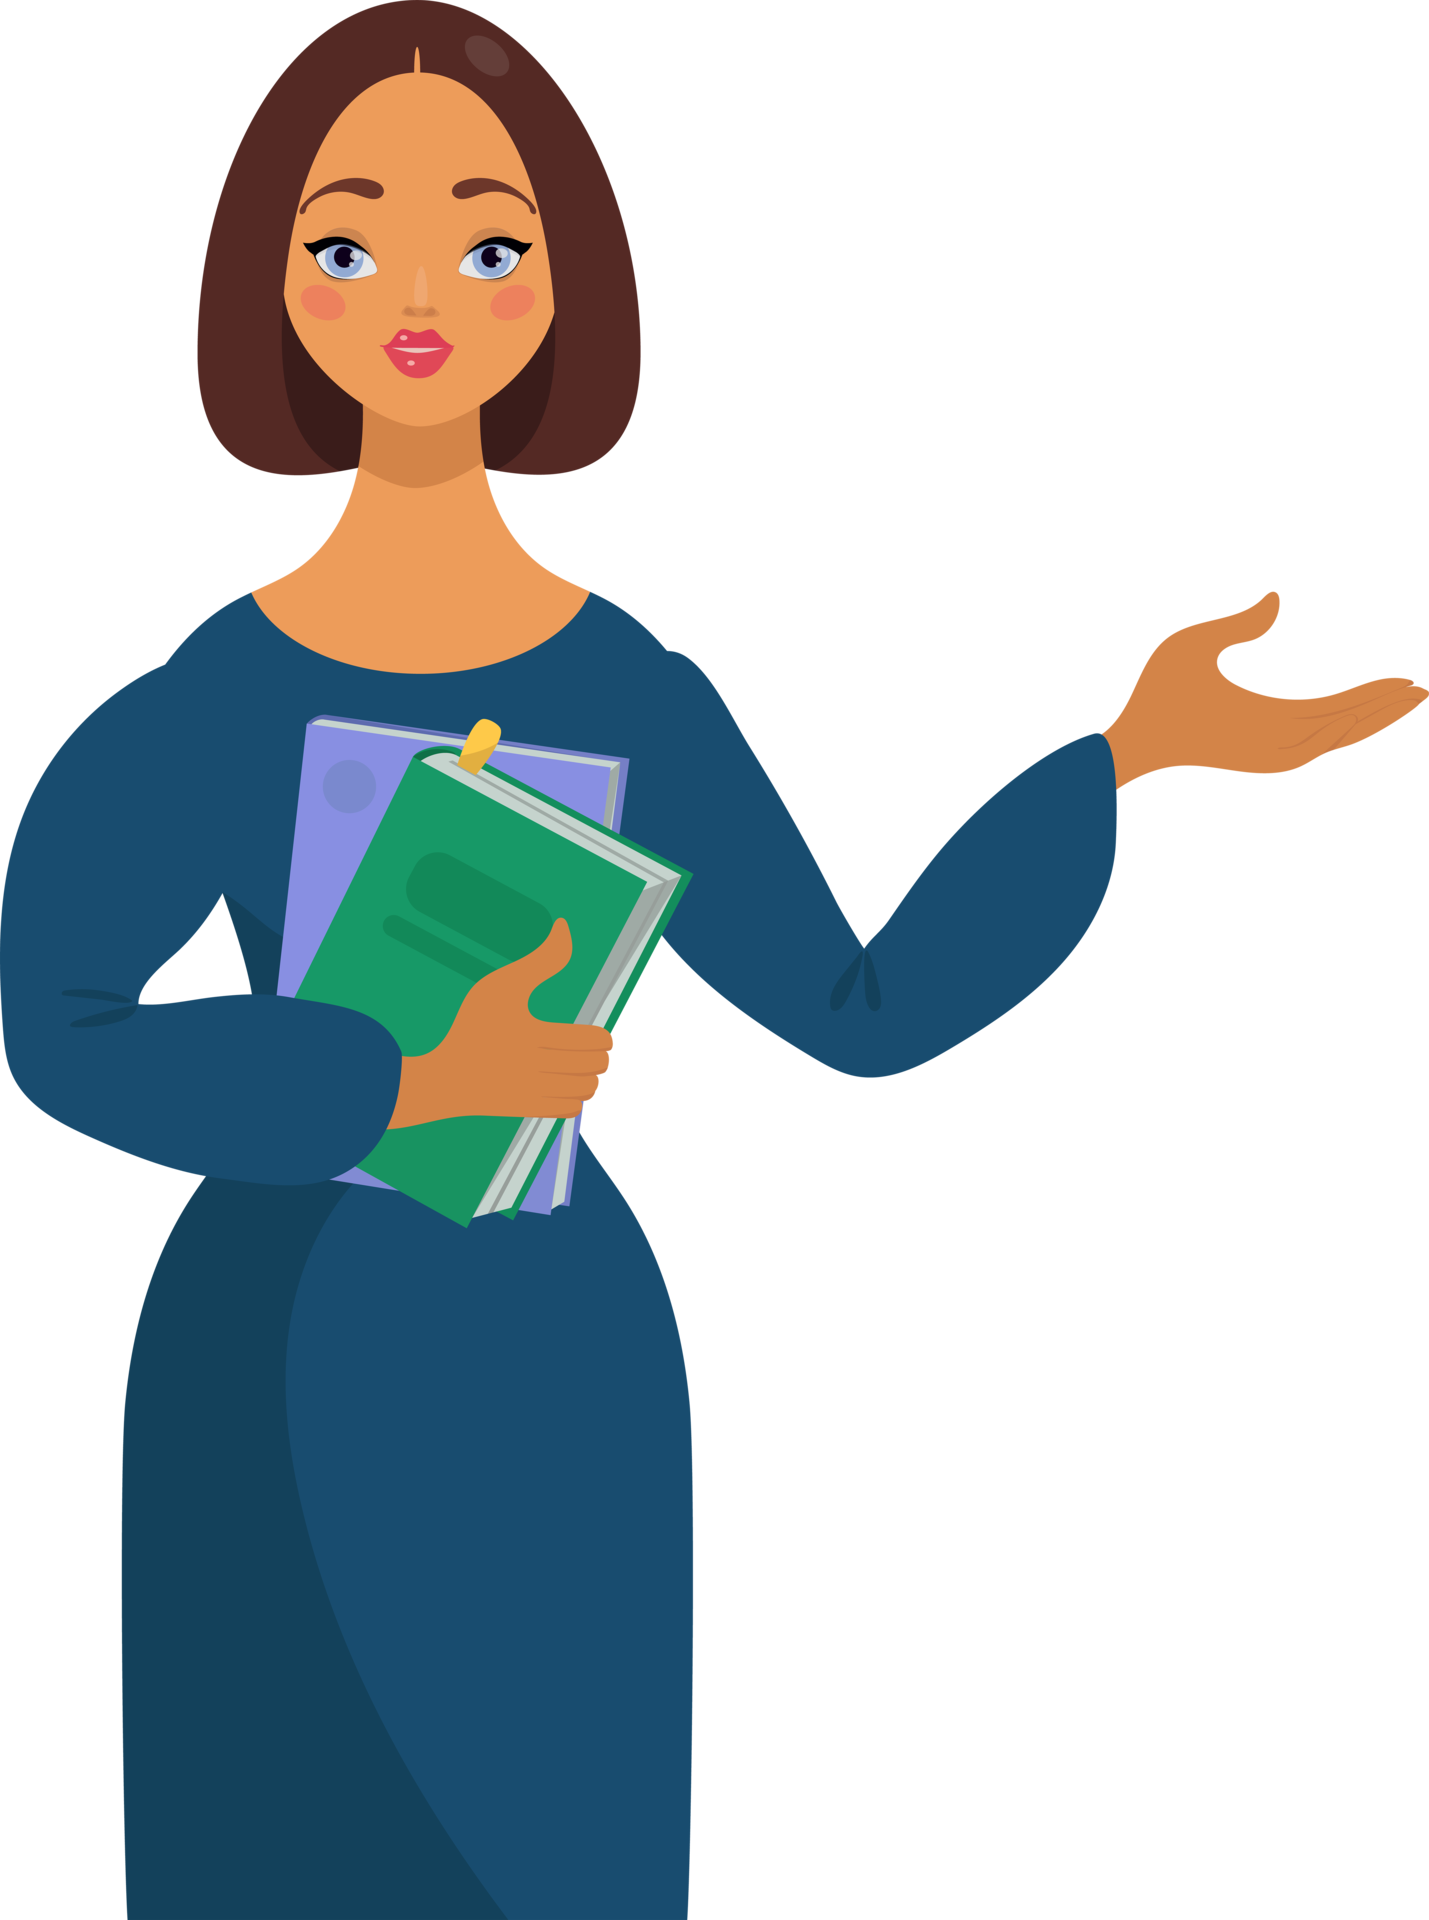 Free Cute Female teacher, girl pointing with her hand, holding books.  School and learning concept, teacher s day, illustration in cartoon style  13166349 PNG with Transparent Background